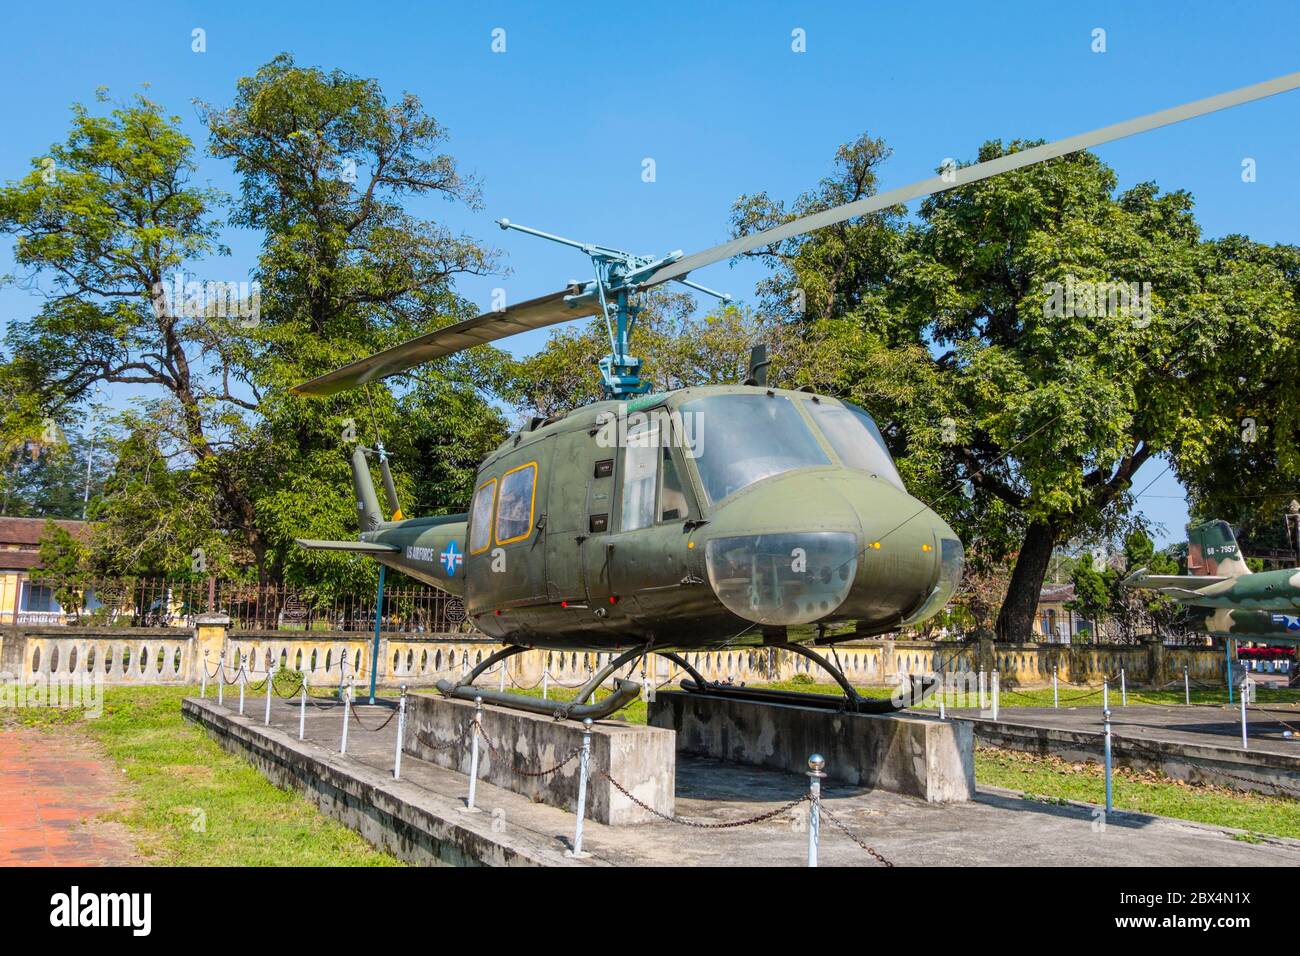 UH-1 Helicopter, used by US army in Vietnam army and seized  in 1975, Thua Thien Hue History Museum, Hue War Museum, Hue, Vietnam Stock Photo